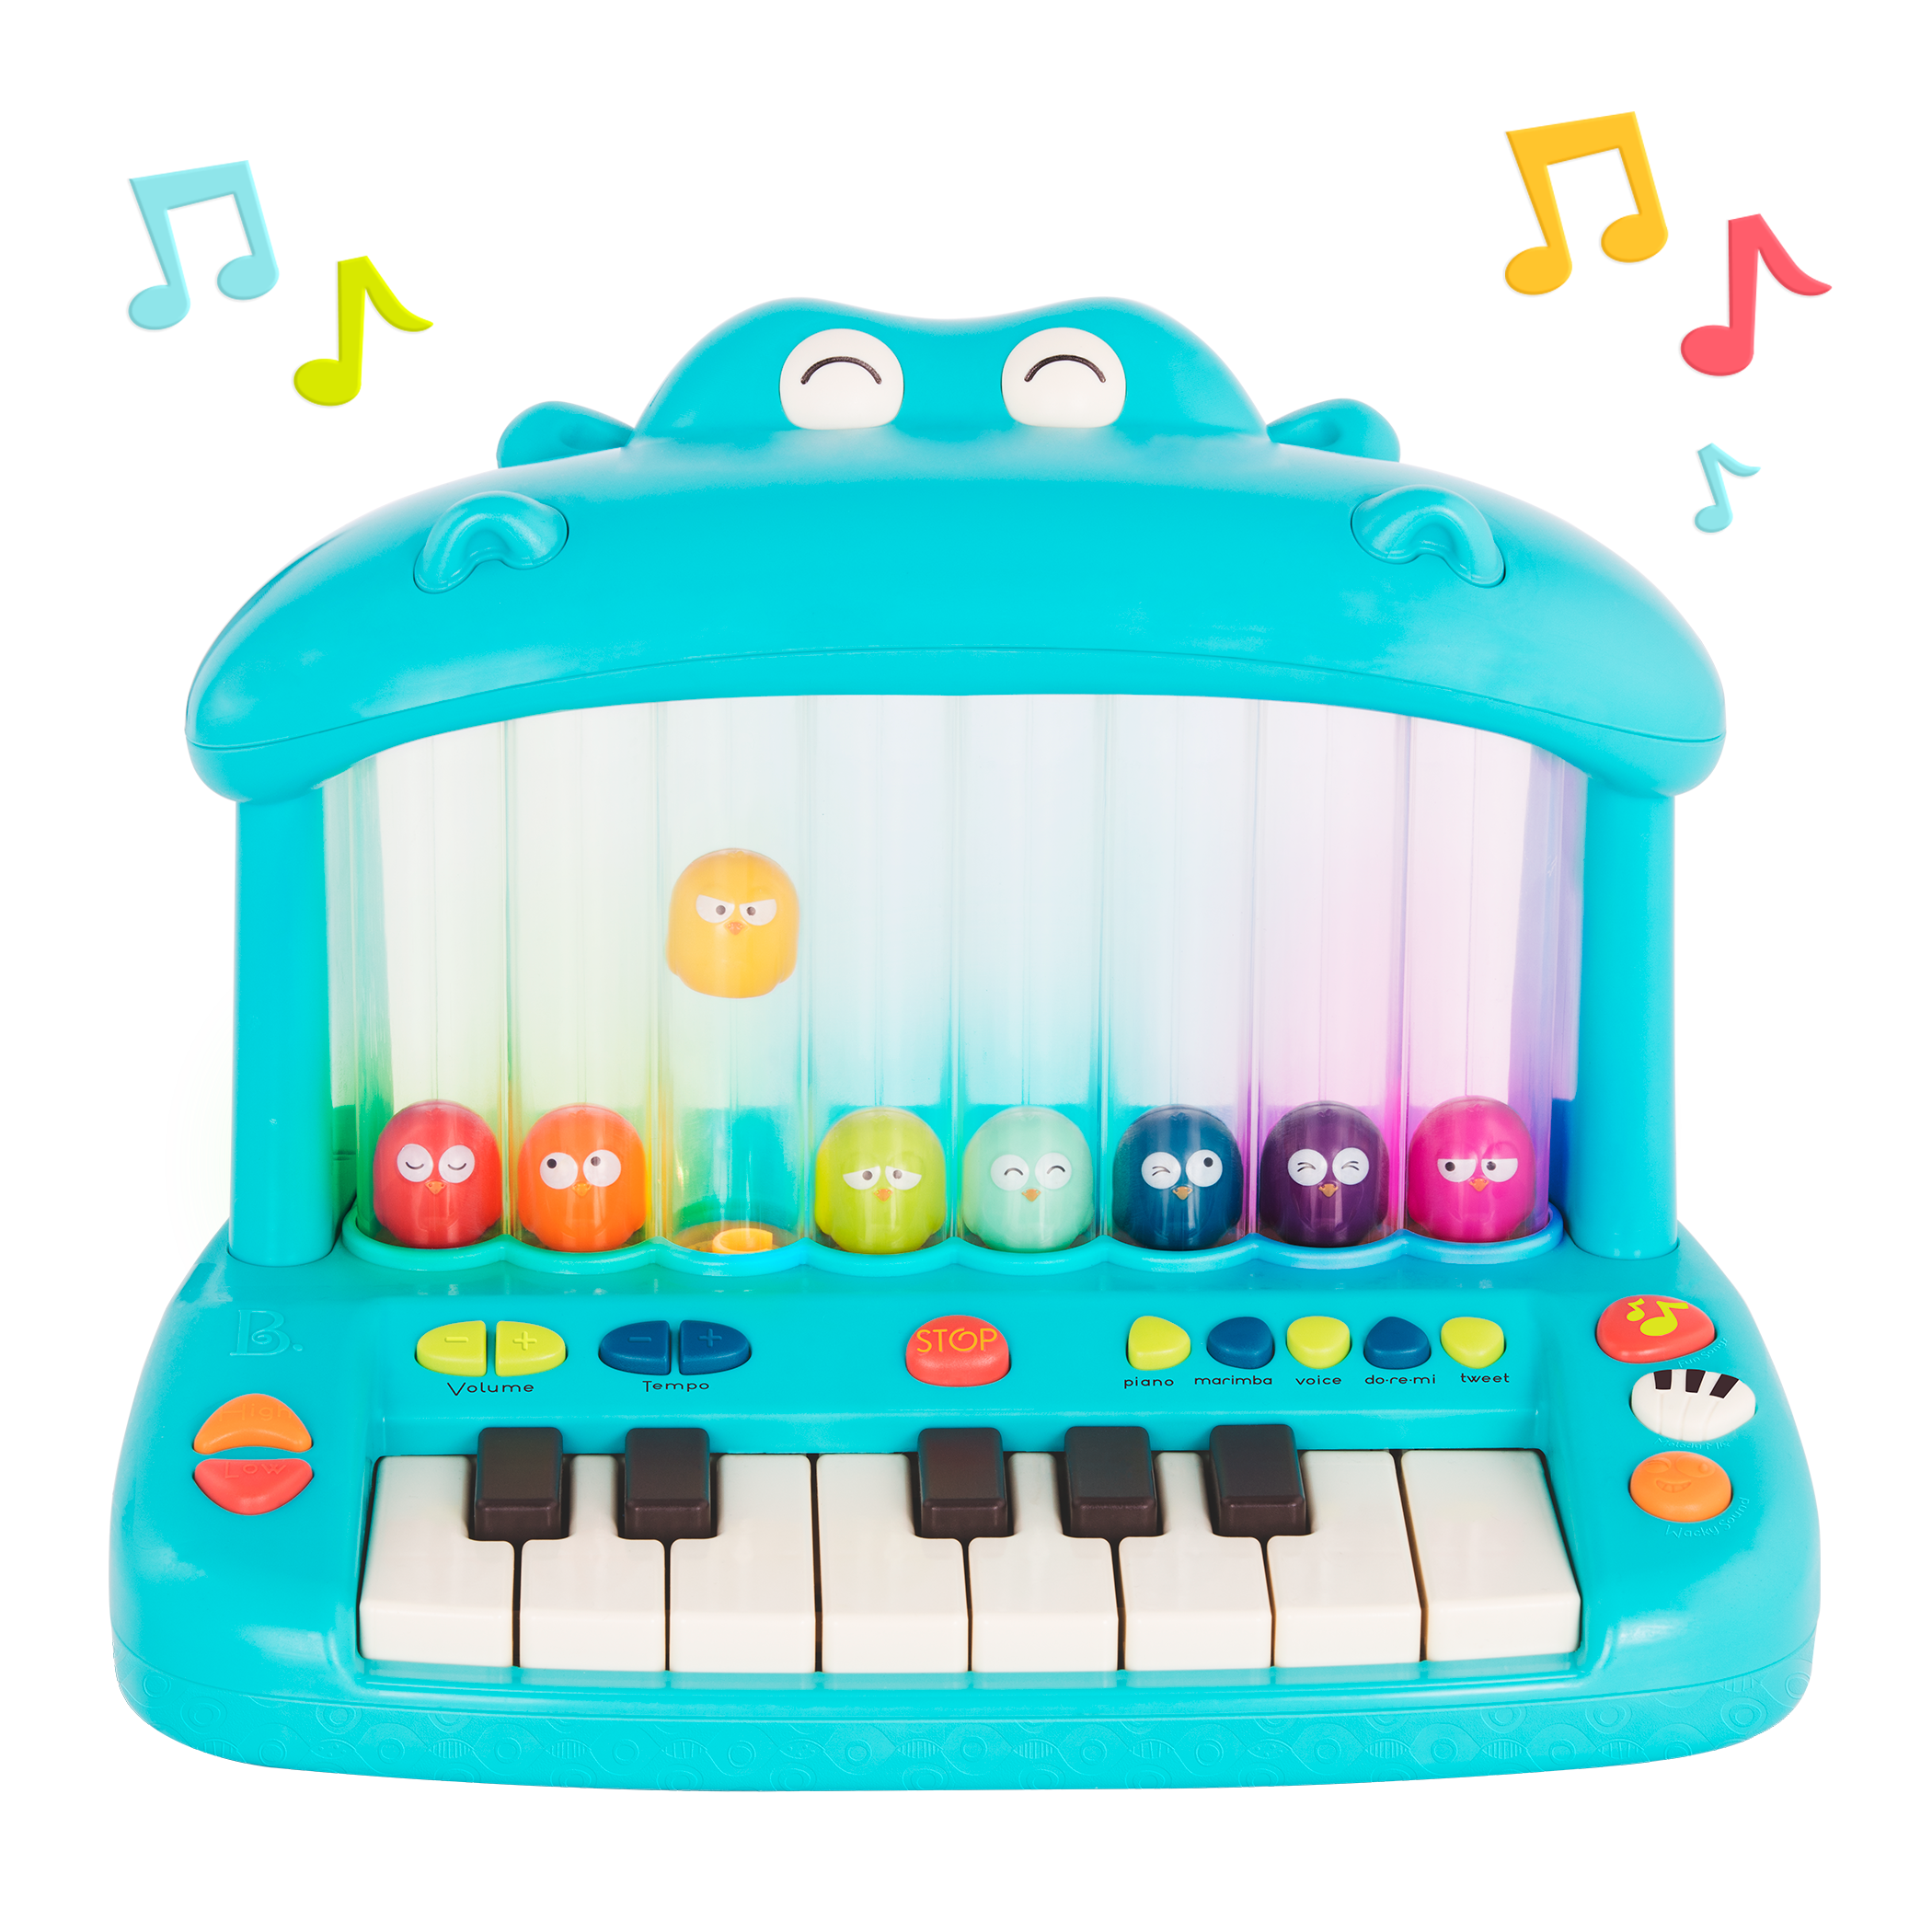 Hippo-shaped play piano for kids with 8 colourful birds.